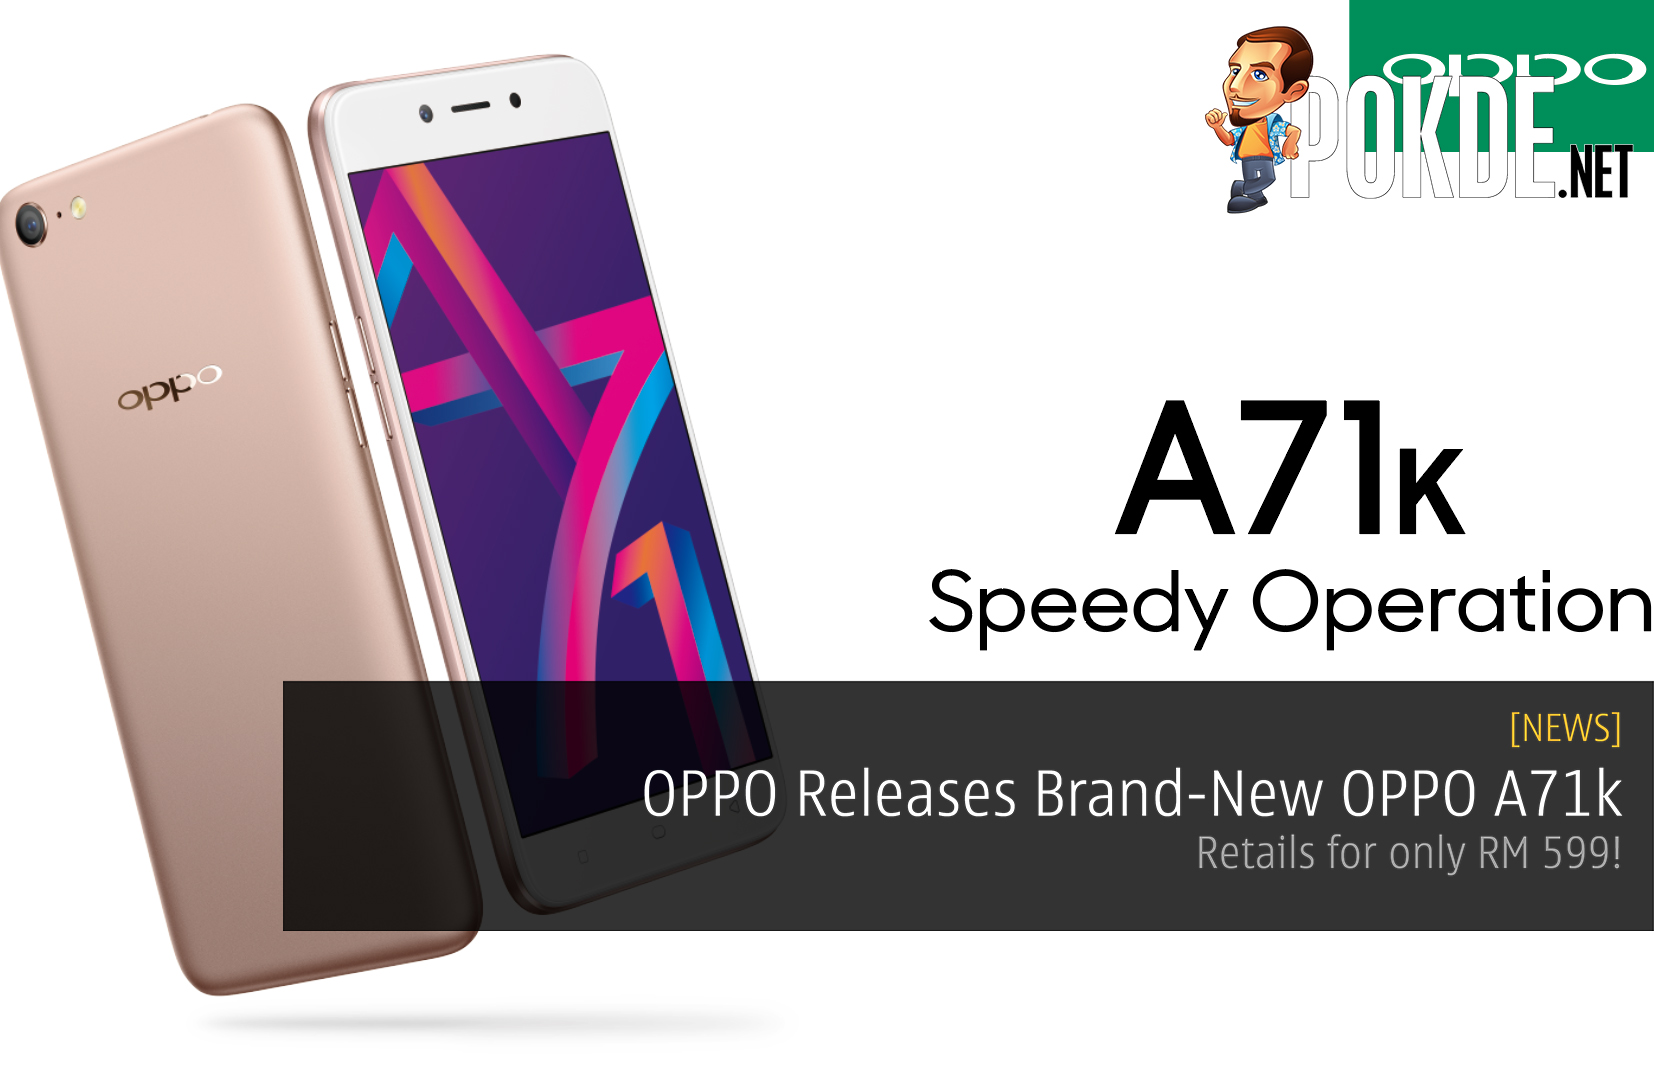 OPPO Releases Brand-New OPPO A71k - Retails for only RM 599! 35